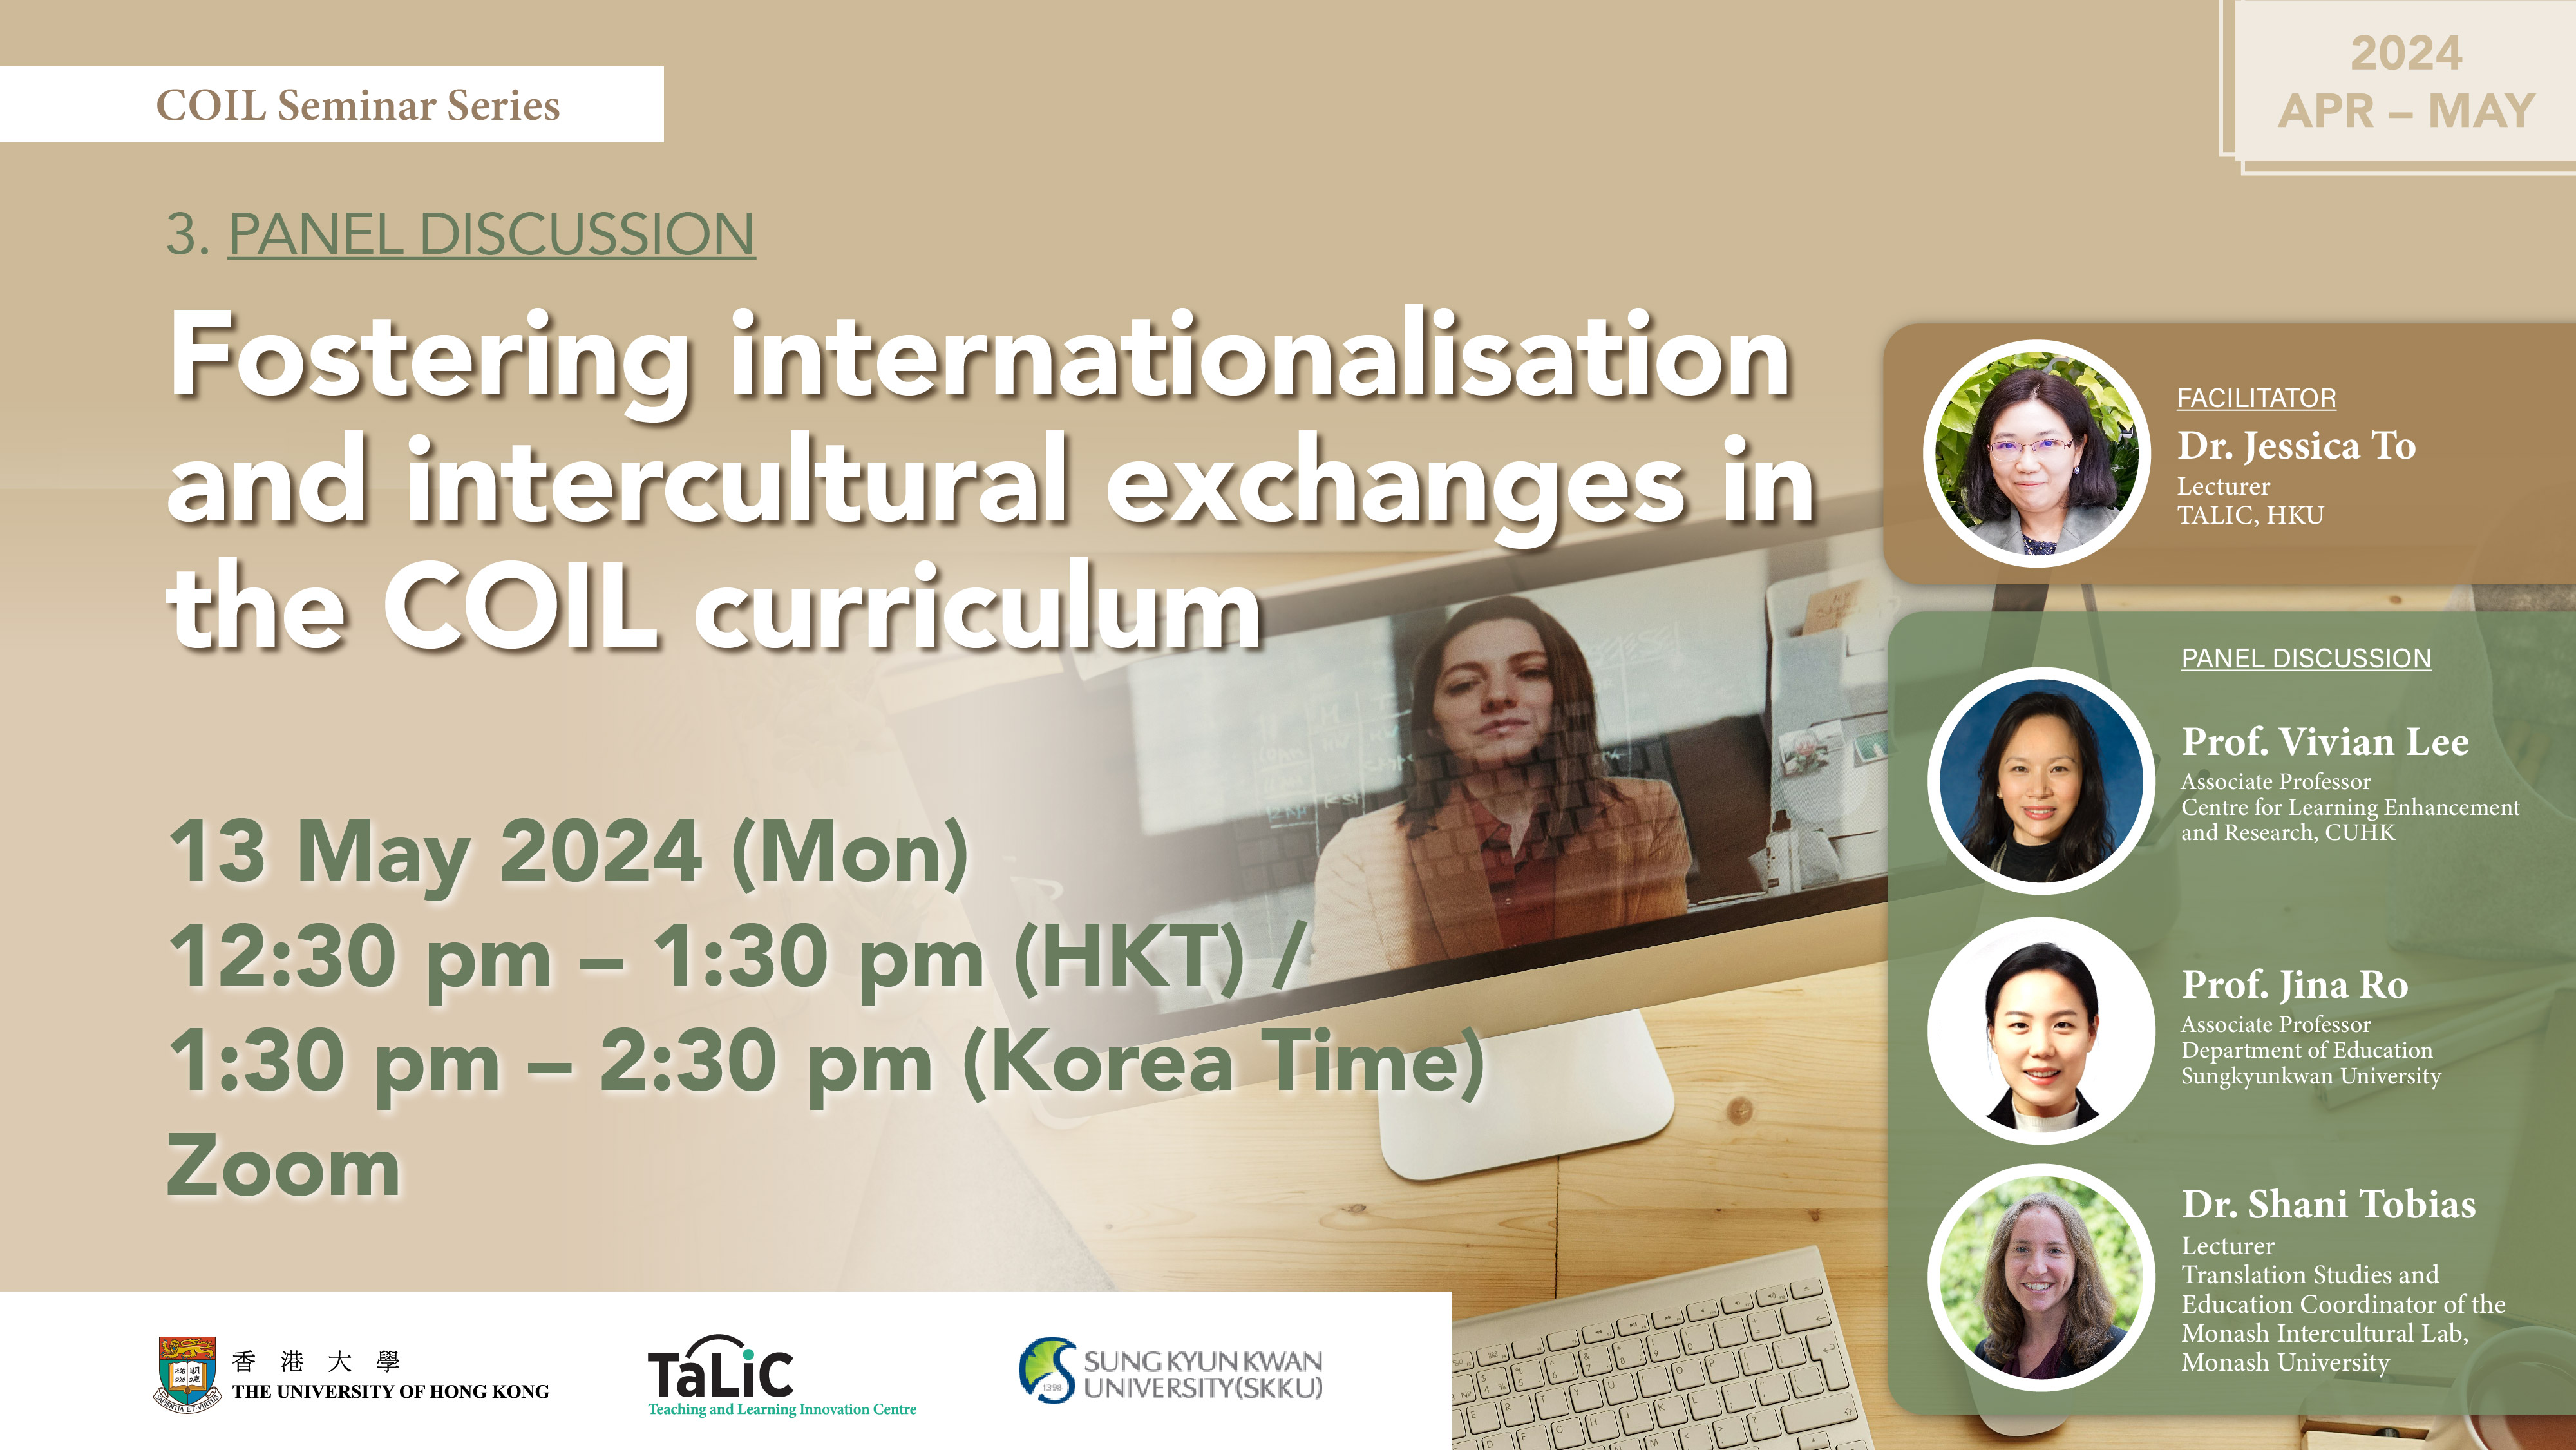 3. Panel Discussion | Fostering internationalisation and intercultural exchanges in the COIL curriculum